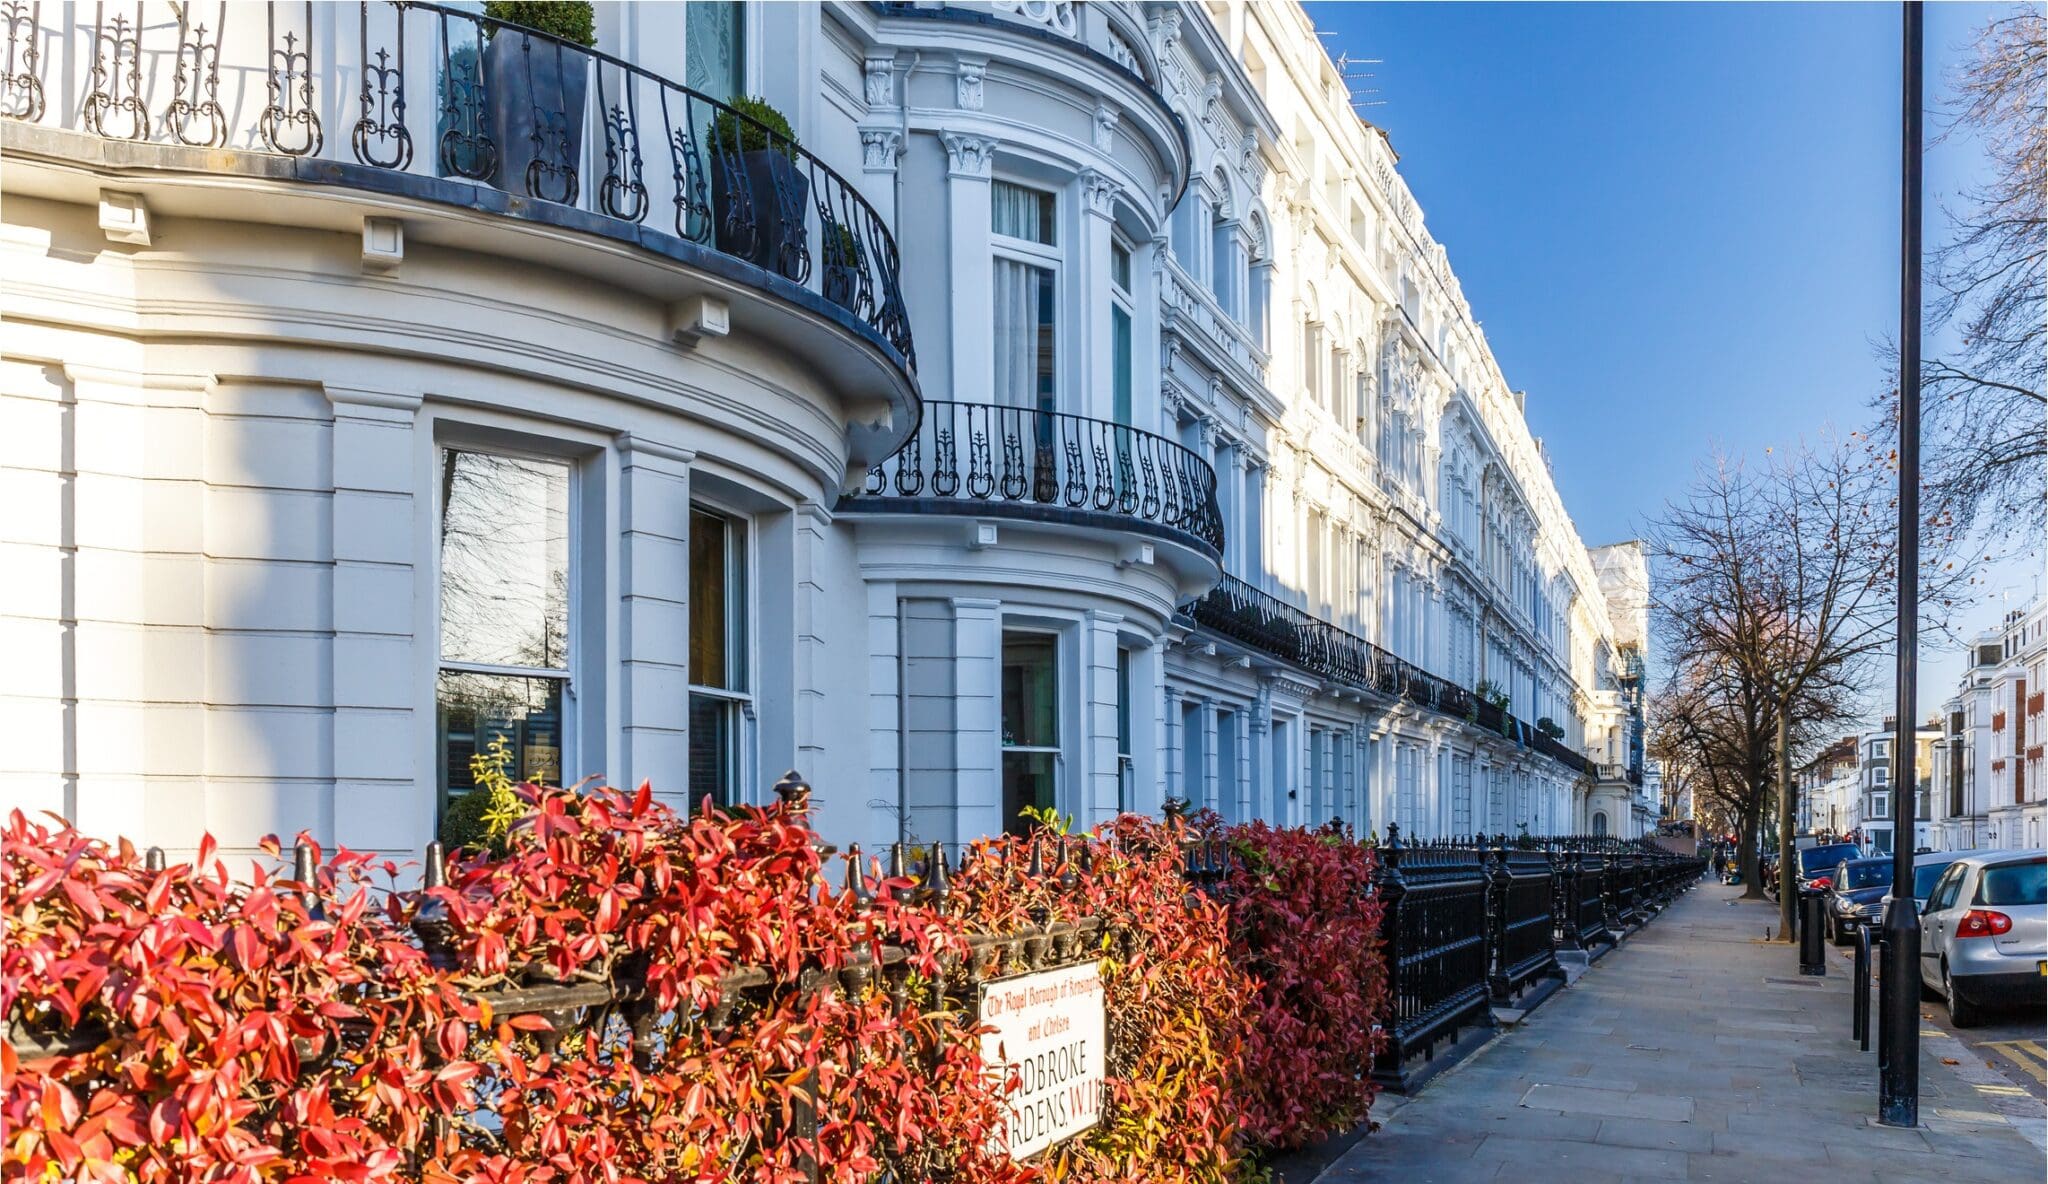 Non-residents buying property in the UK – the story so far